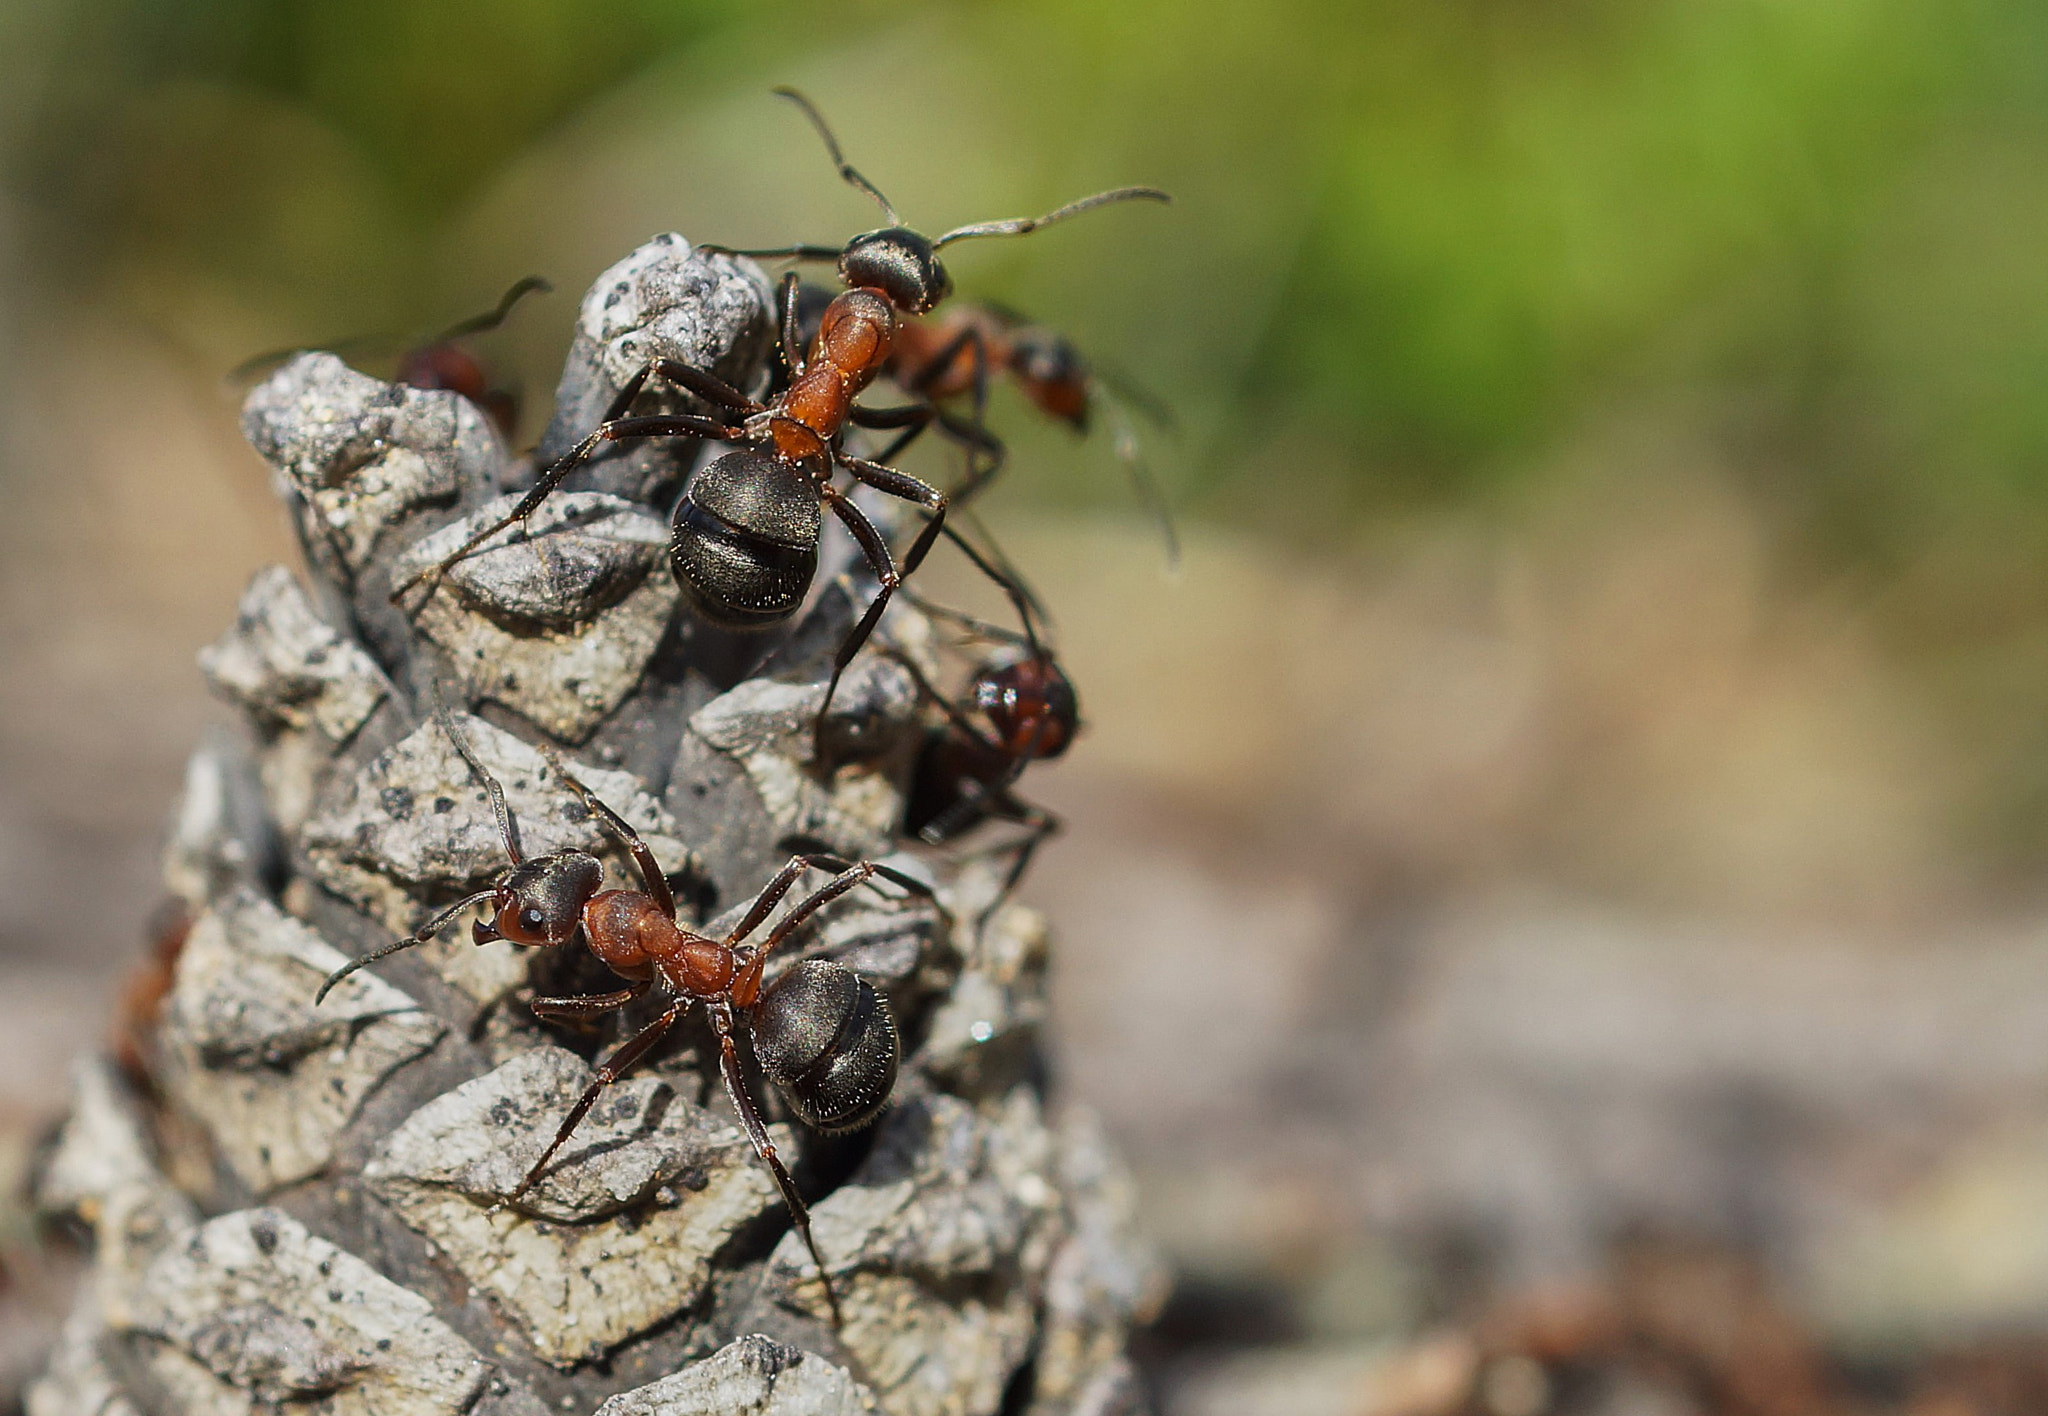 Sony SLT-A77 + Sony DT 30mm F2.8 Macro SAM sample photo. Ants on pine cone fallen into the anthill photography